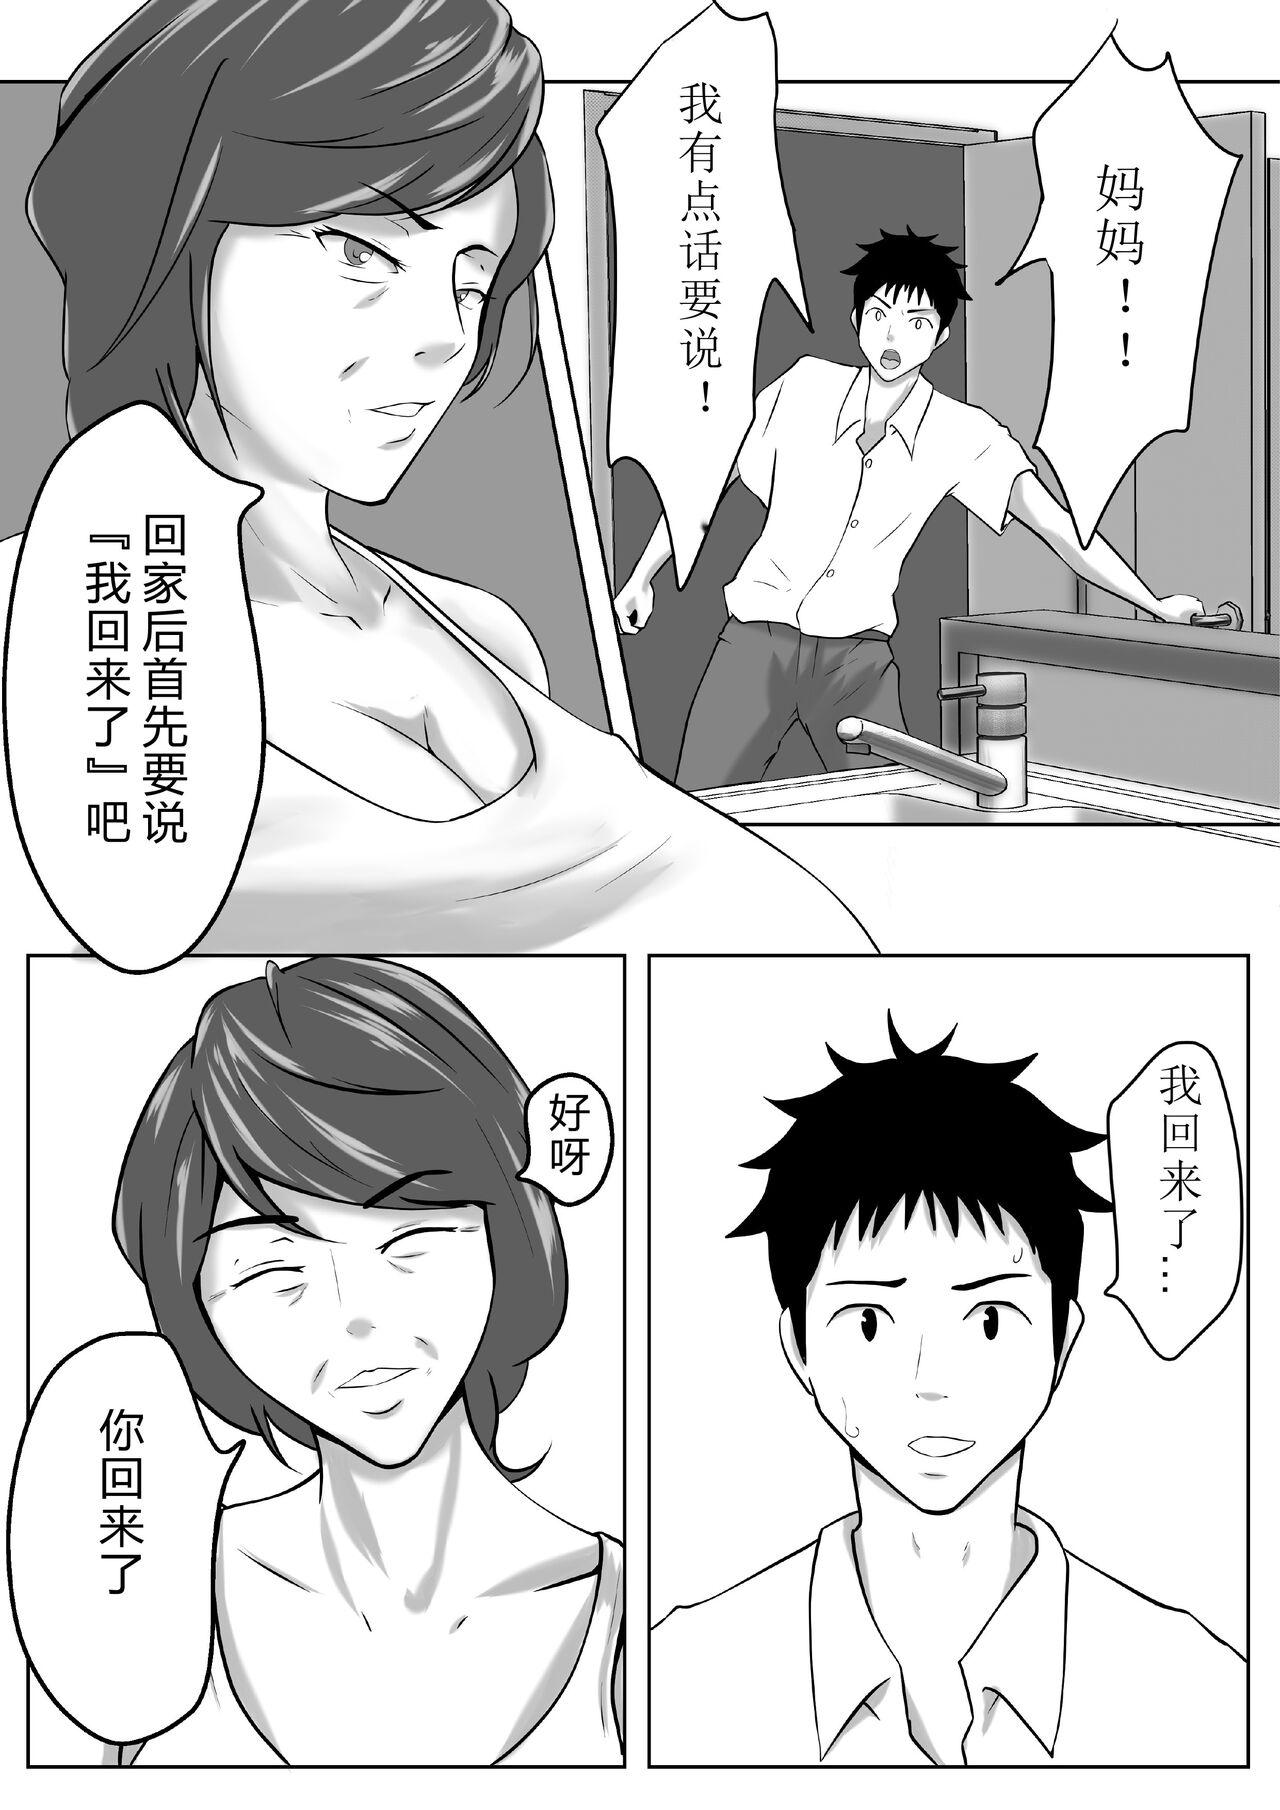 Transsexual 母は女でした3 Stripping - Page 8